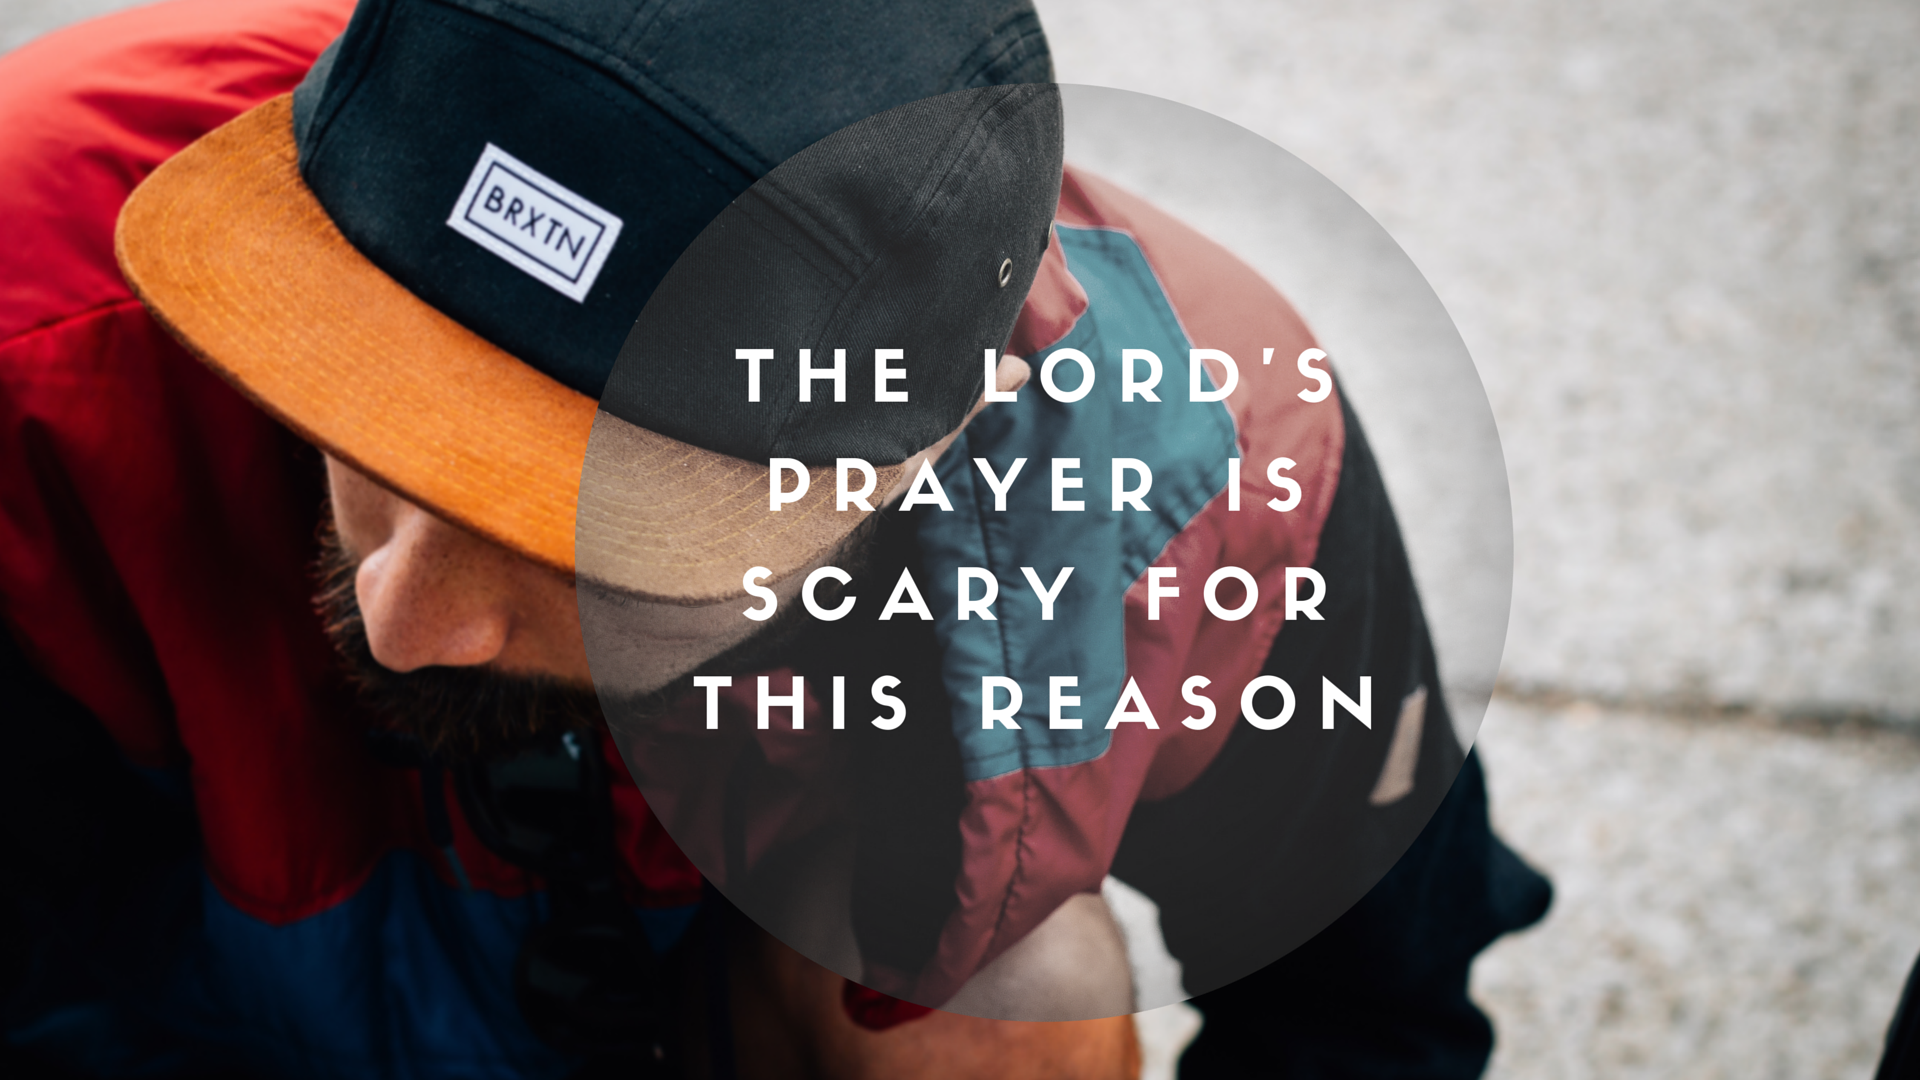 The Lord's Prayer is Scary for This Reason